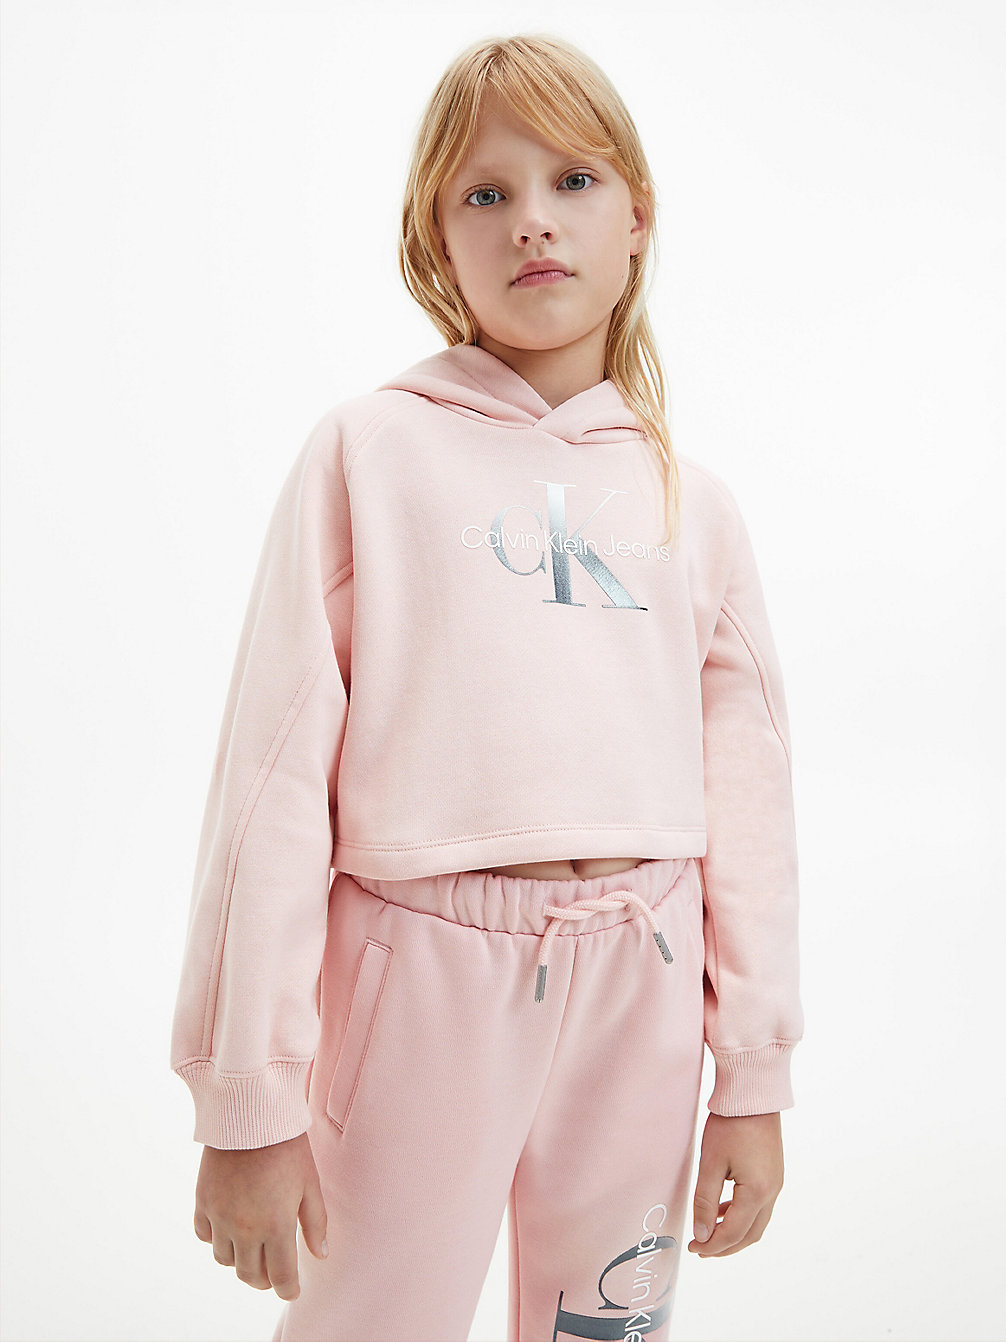 PINK BLUSH Recycled Polyester Cropped Hoodie undefined girls Calvin Klein